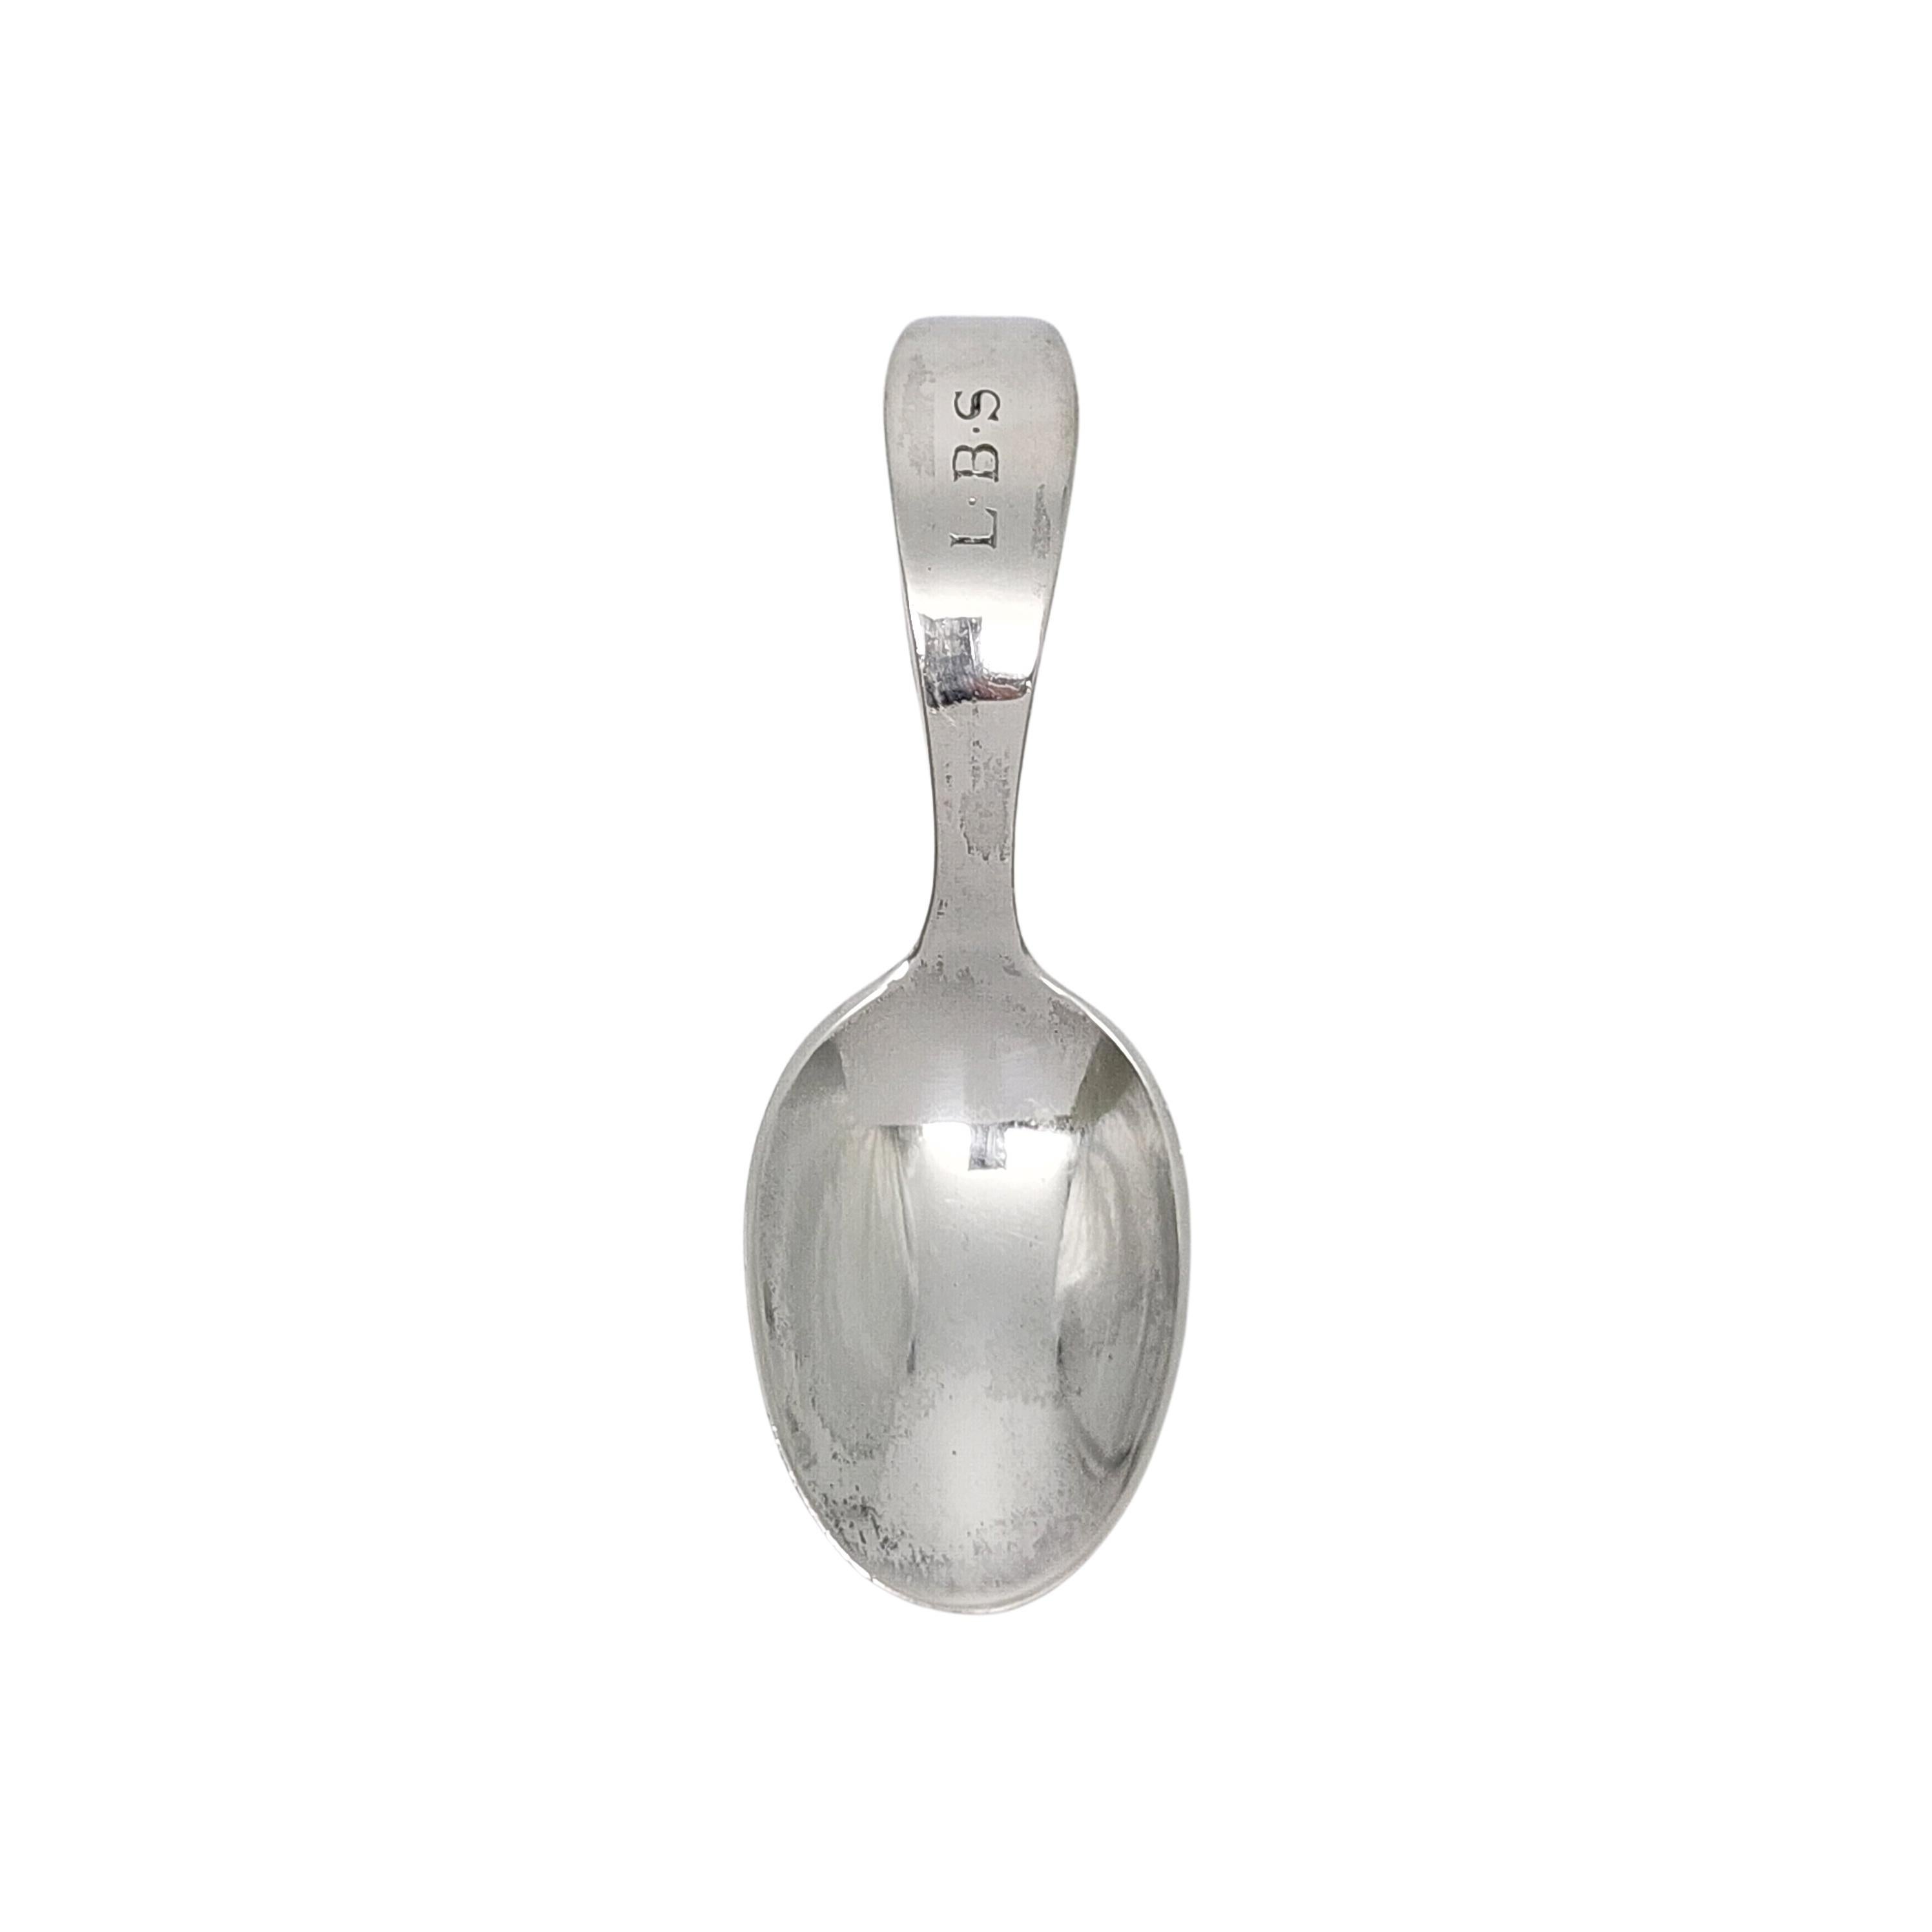 Tiffany & Co Sterling Silver Curved Loop Handle Baby Spoon w/Monogram #17262 In Good Condition For Sale In Washington Depot, CT